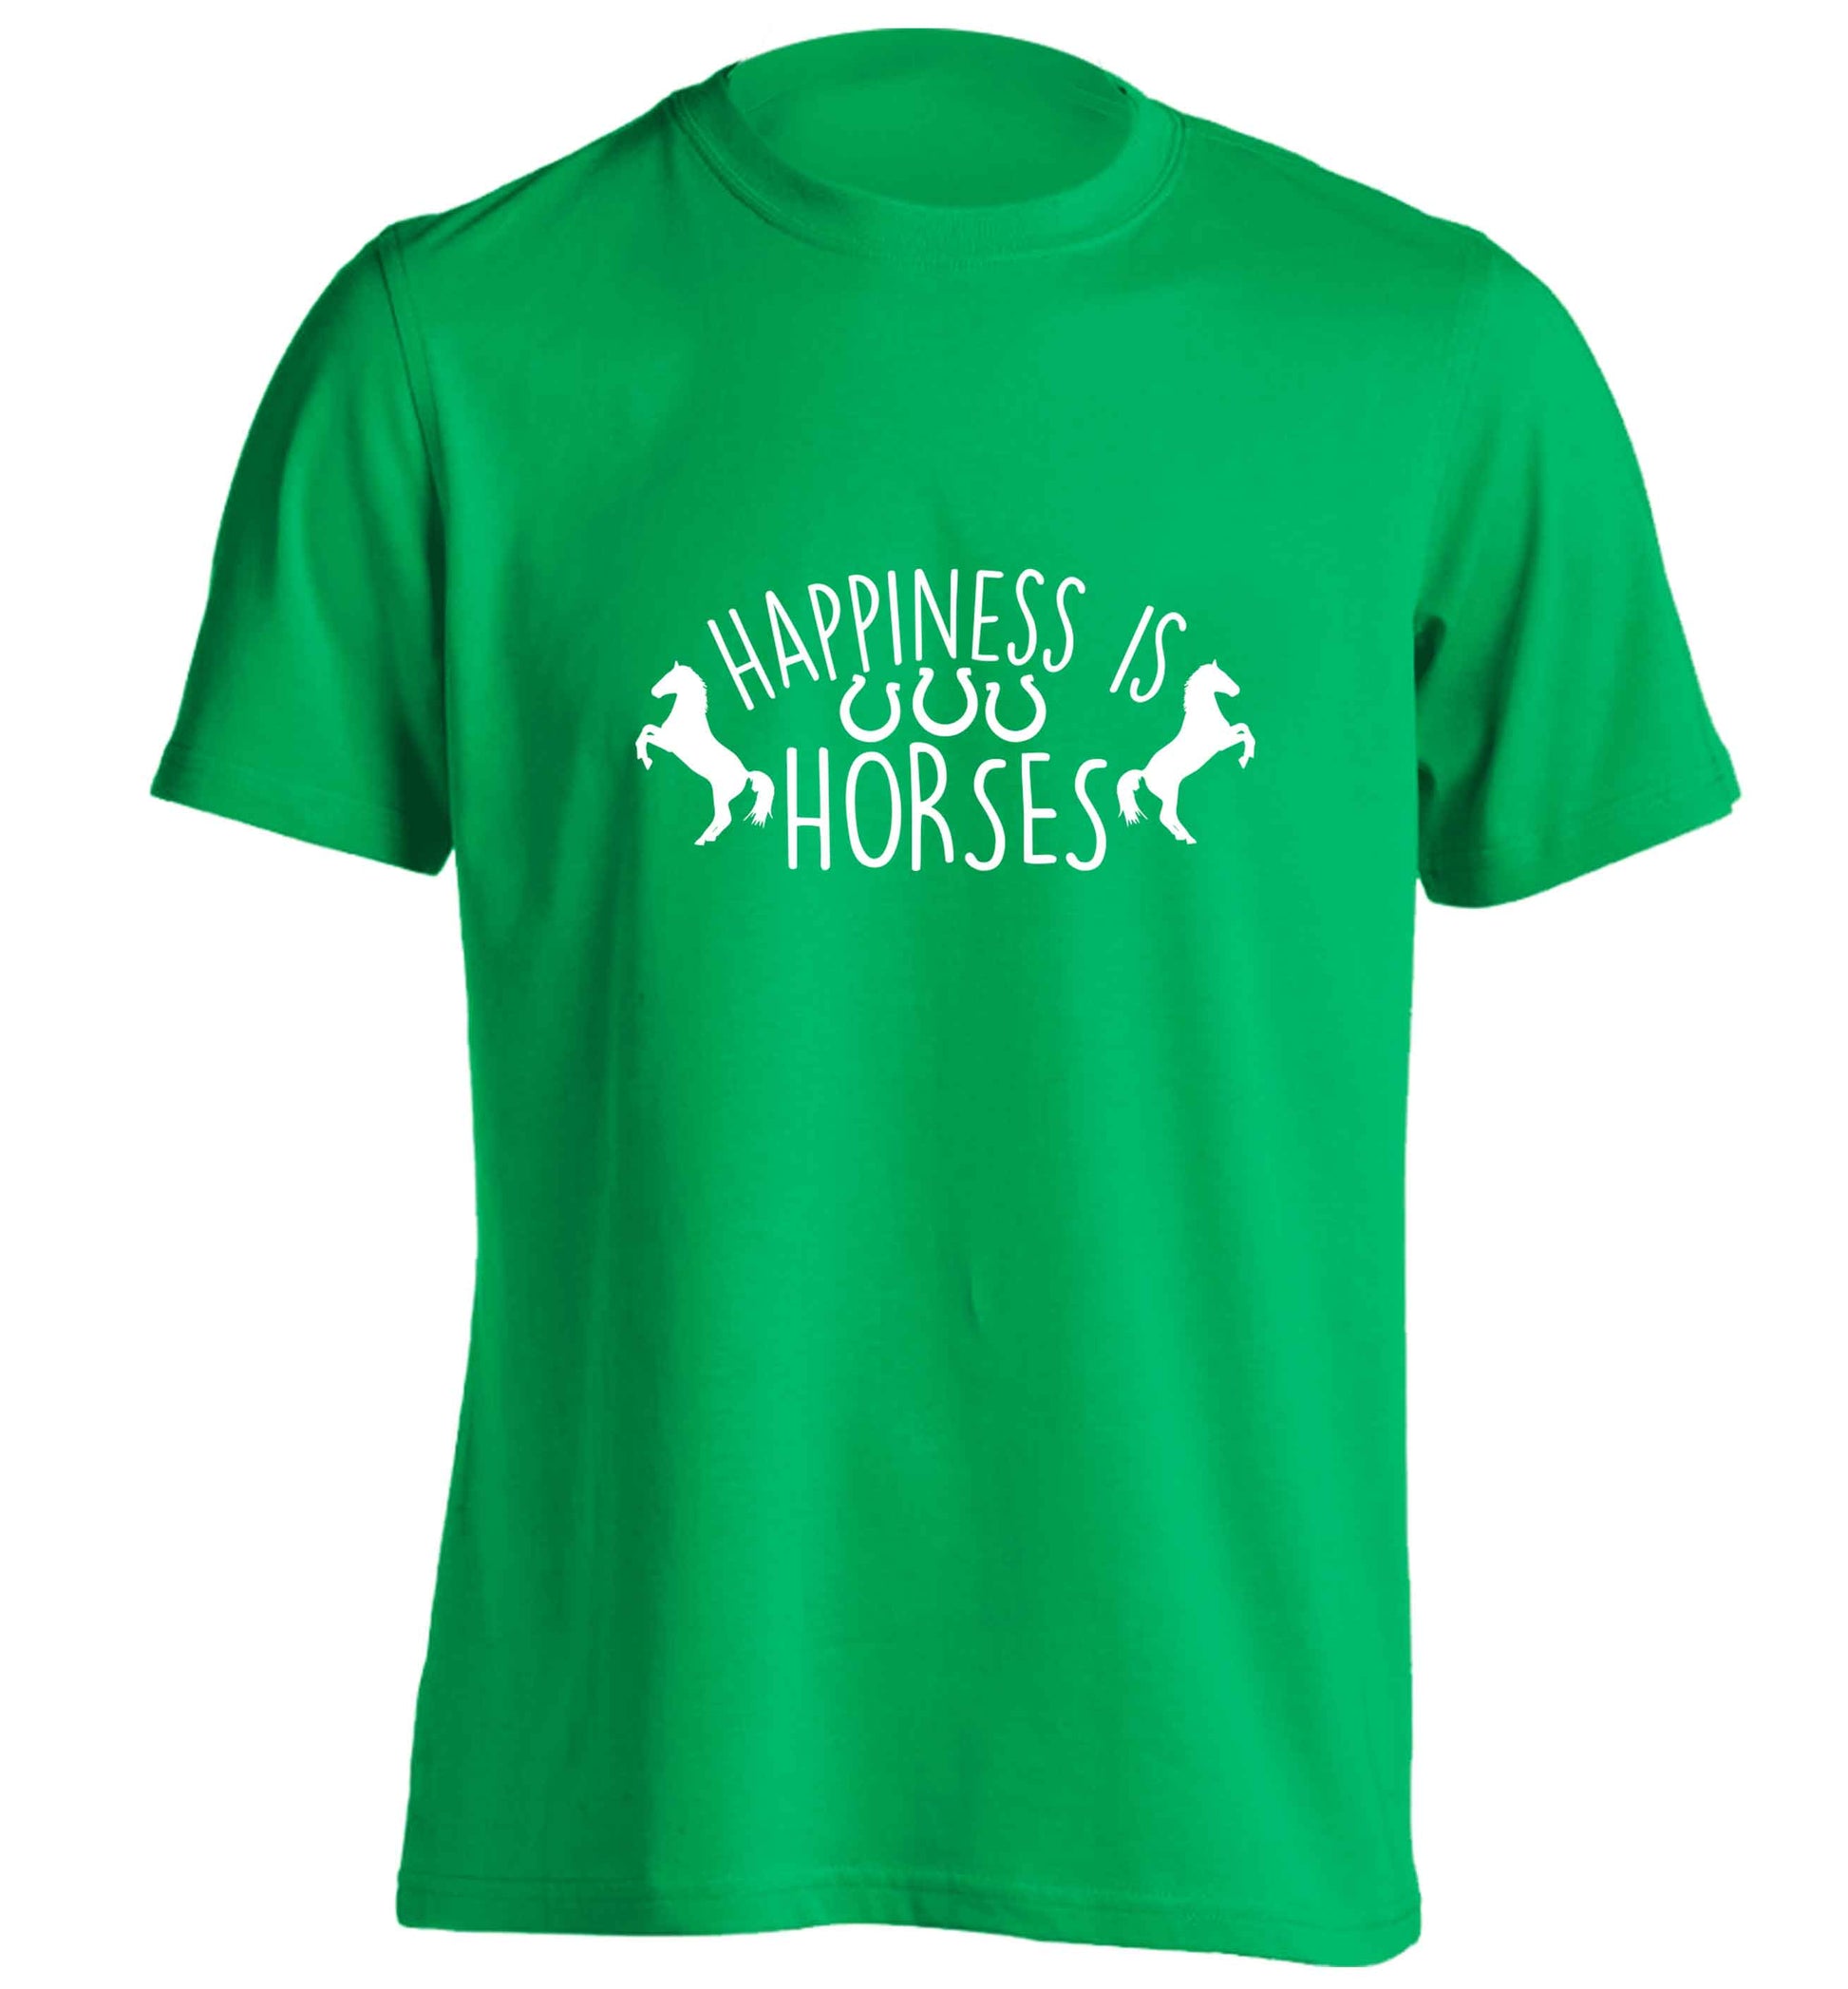 Happiness is horses adults unisex green Tshirt 2XL